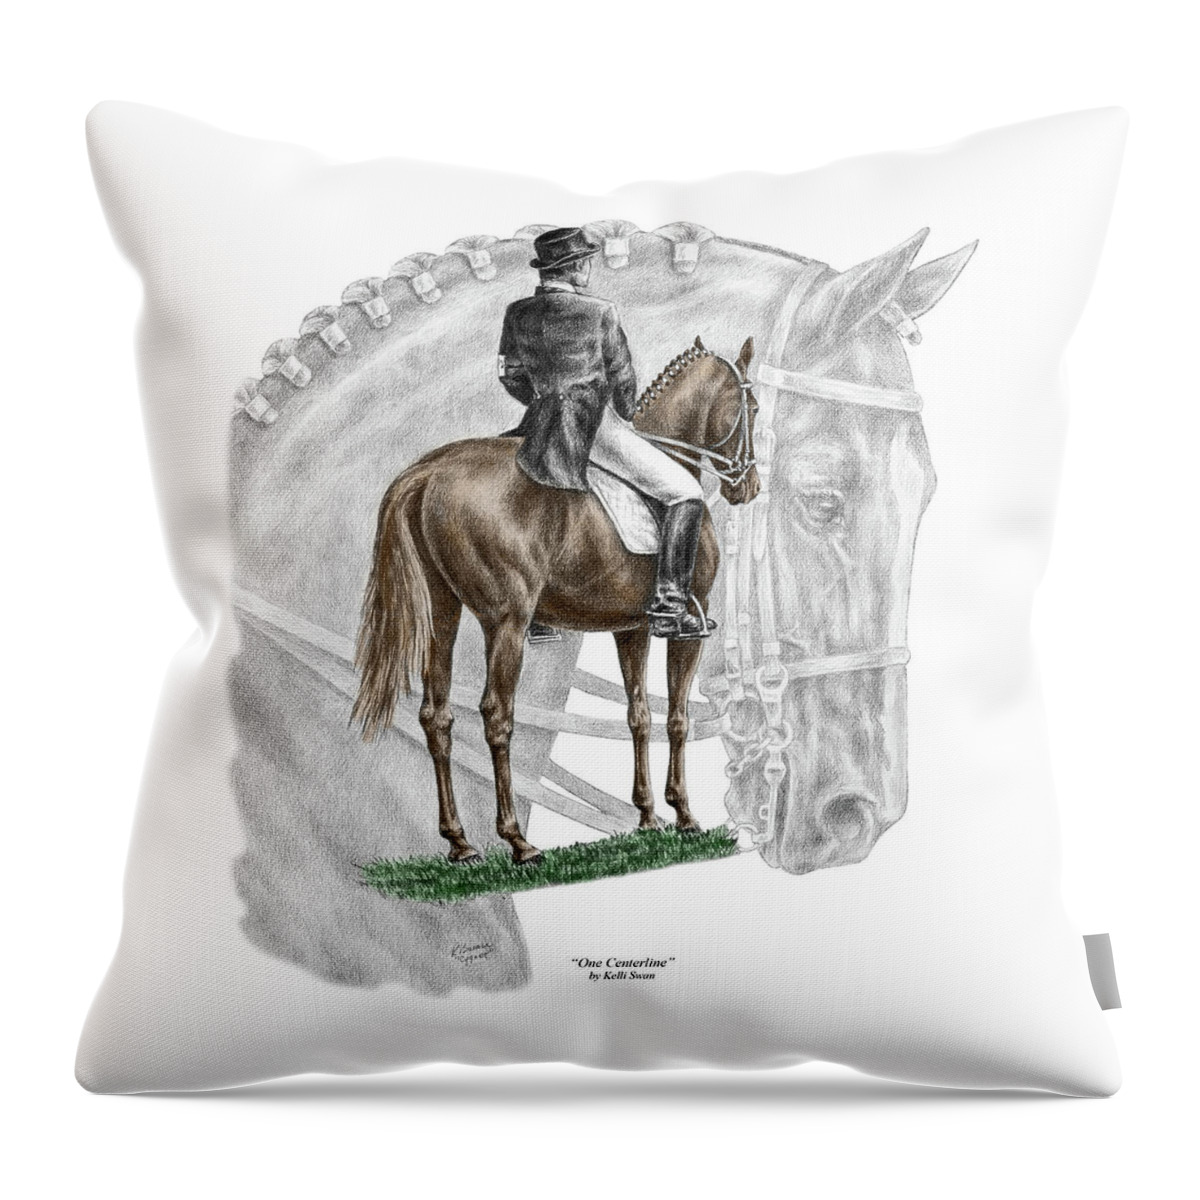 Dressage Throw Pillow featuring the drawing On Centerline - Dressage Horse Print color tinted by Kelli Swan